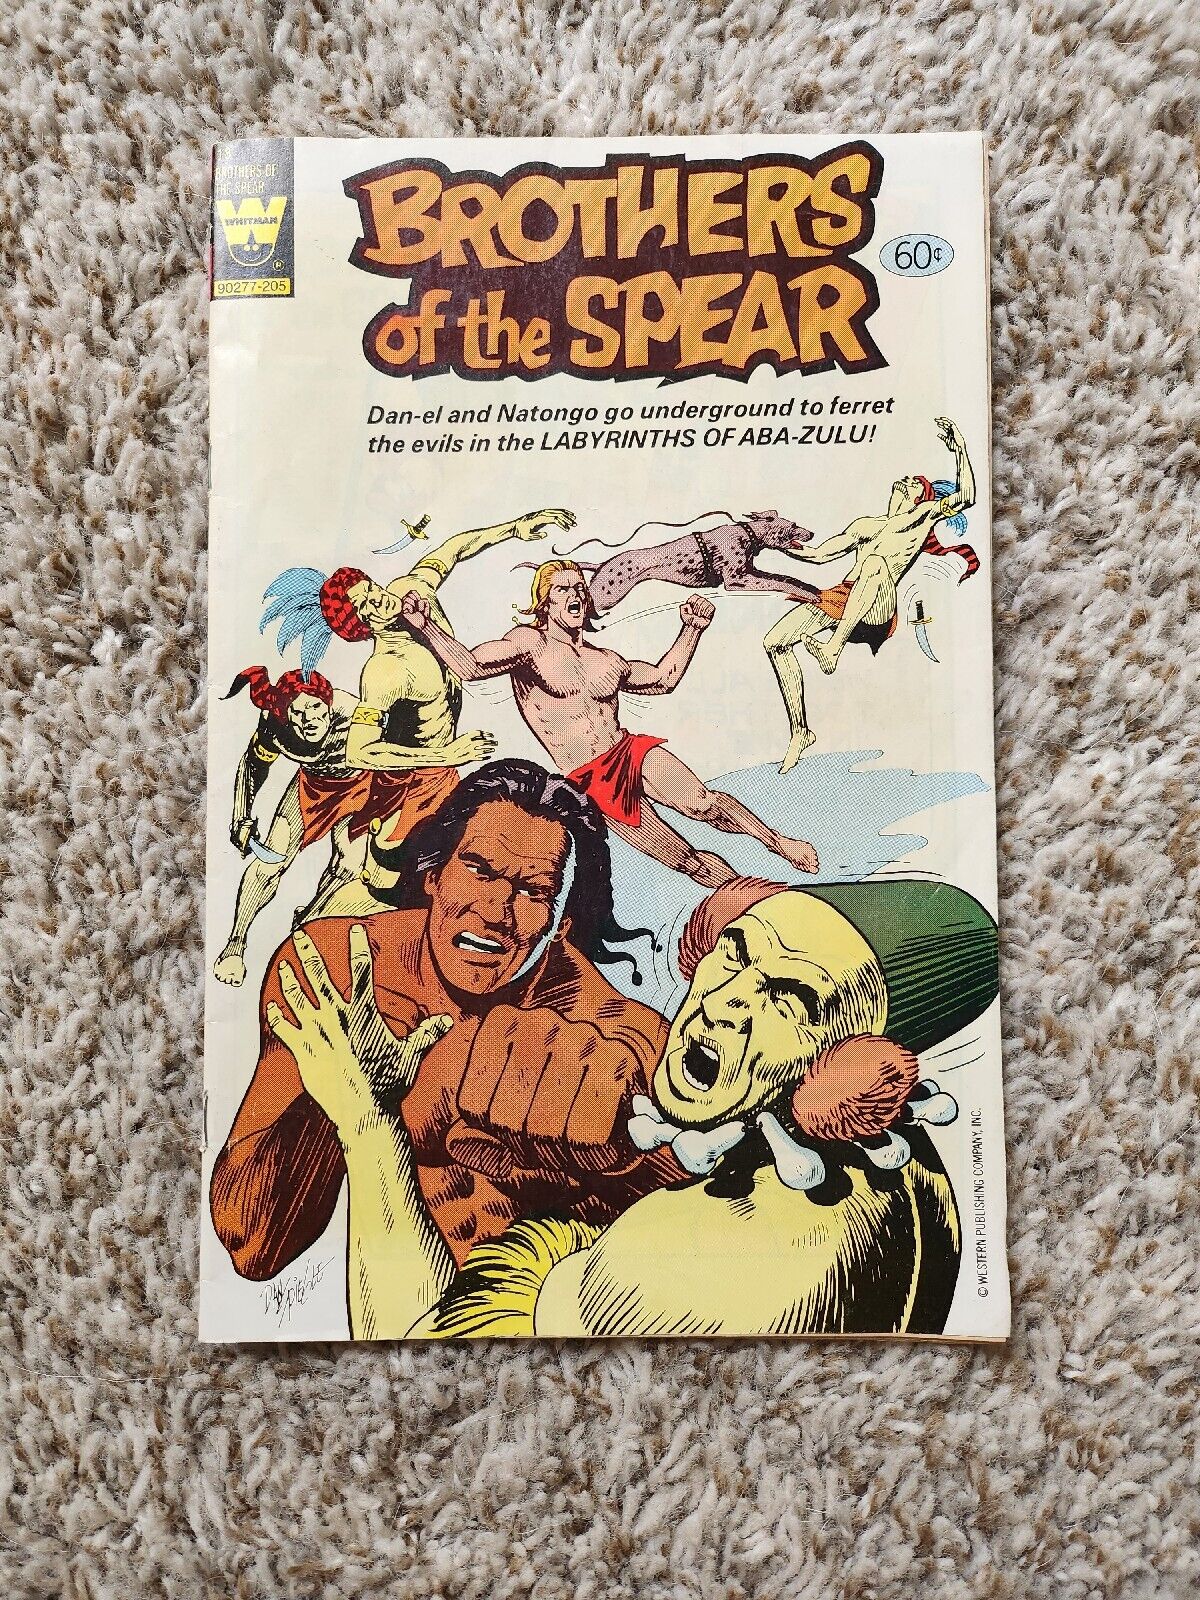 Brothers Of The Spear #18 - 1977 WHITMAN COMICS WESTERN PUBLISHING